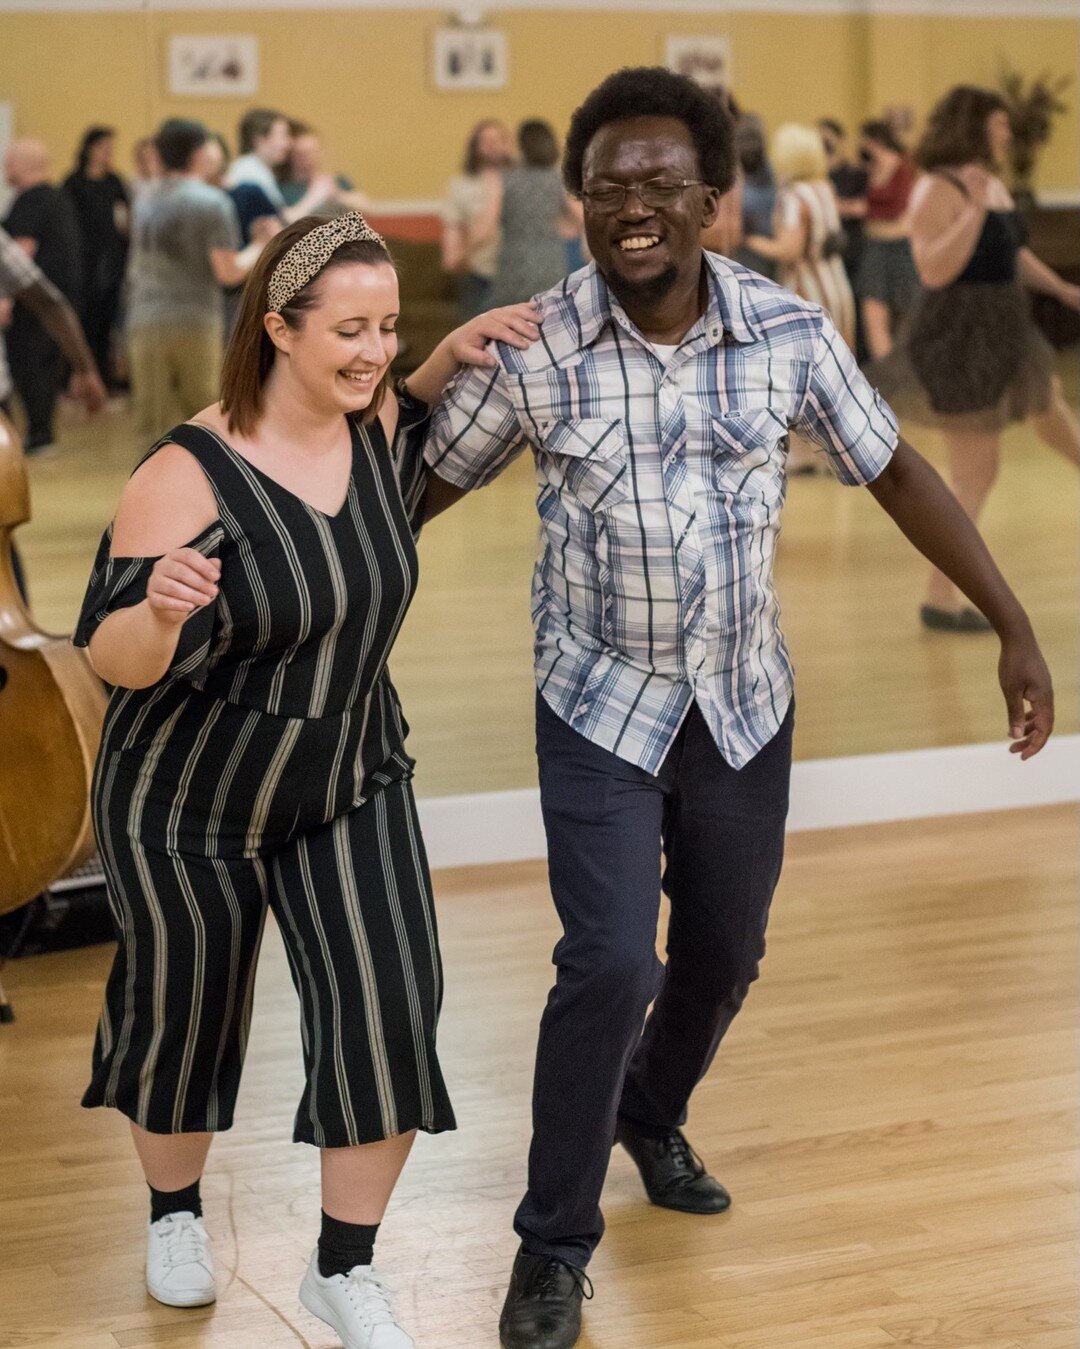 Bring your brightest smiles and swing into spring with us tonight! The fun starts at 7 p.m. with a $5 drop-in beginner lesson. And then hang with DJs @felicia.bode and @tomjovi101 from 8-11 p.m. Admission is $10 ($5 for students) We'll see you in the